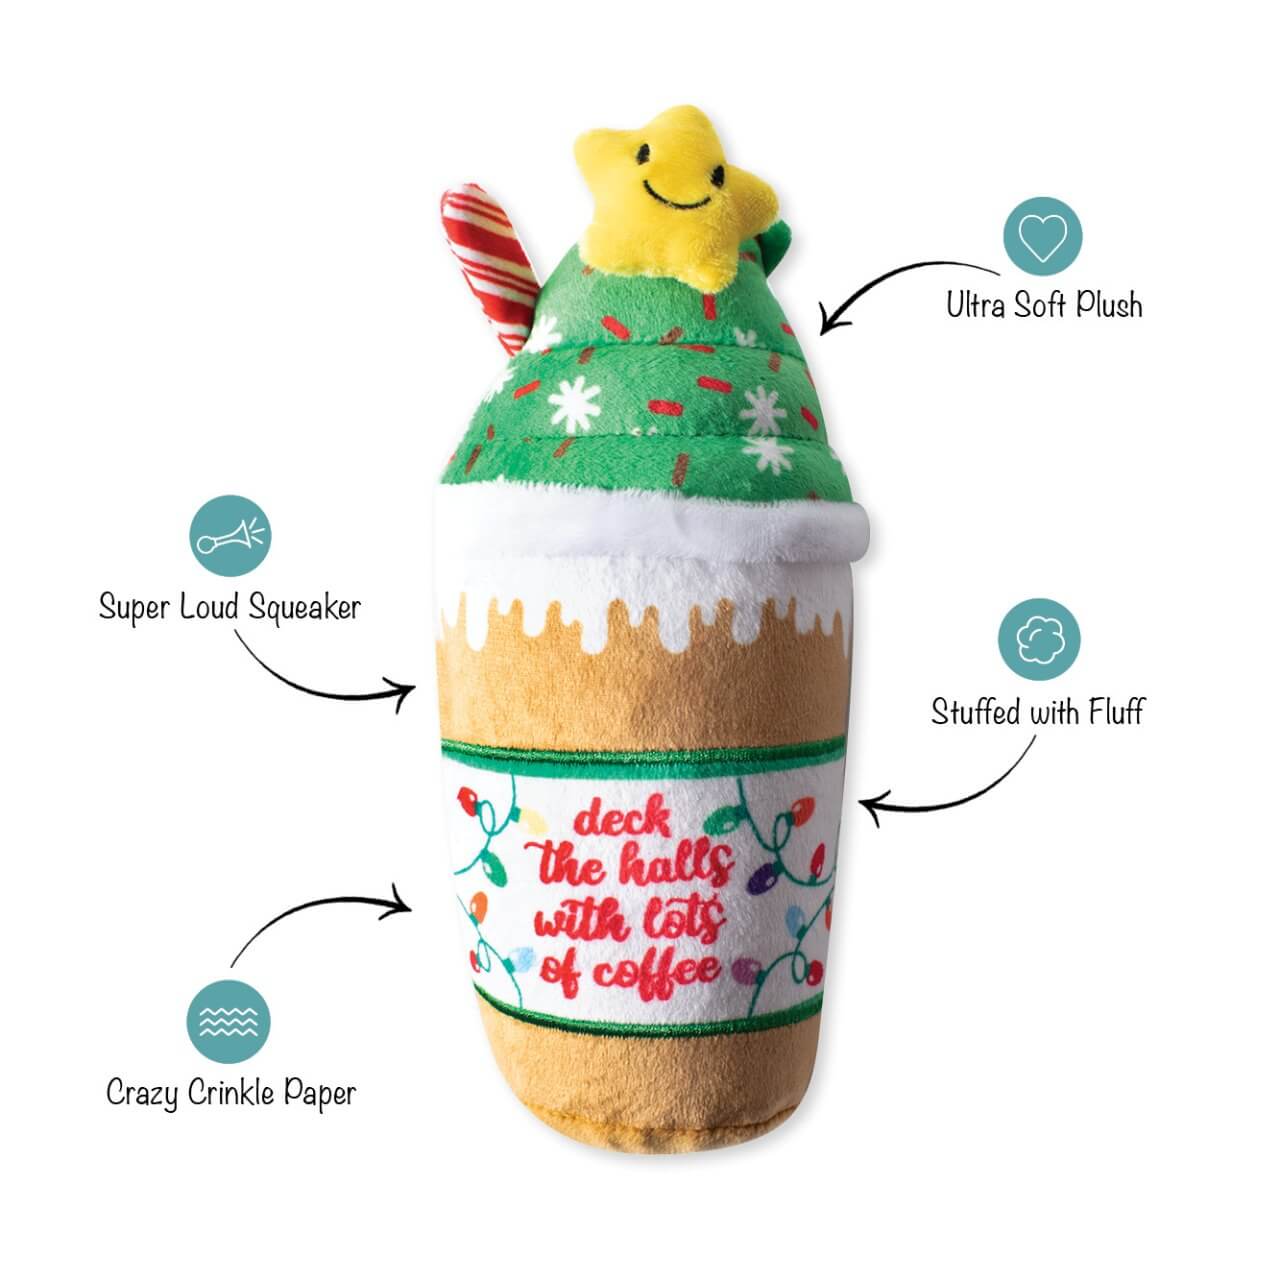 Fringe Studio Deck the Halls Christmas dog toy diagram. Its a coffee with a green star and christmas snow flakes.